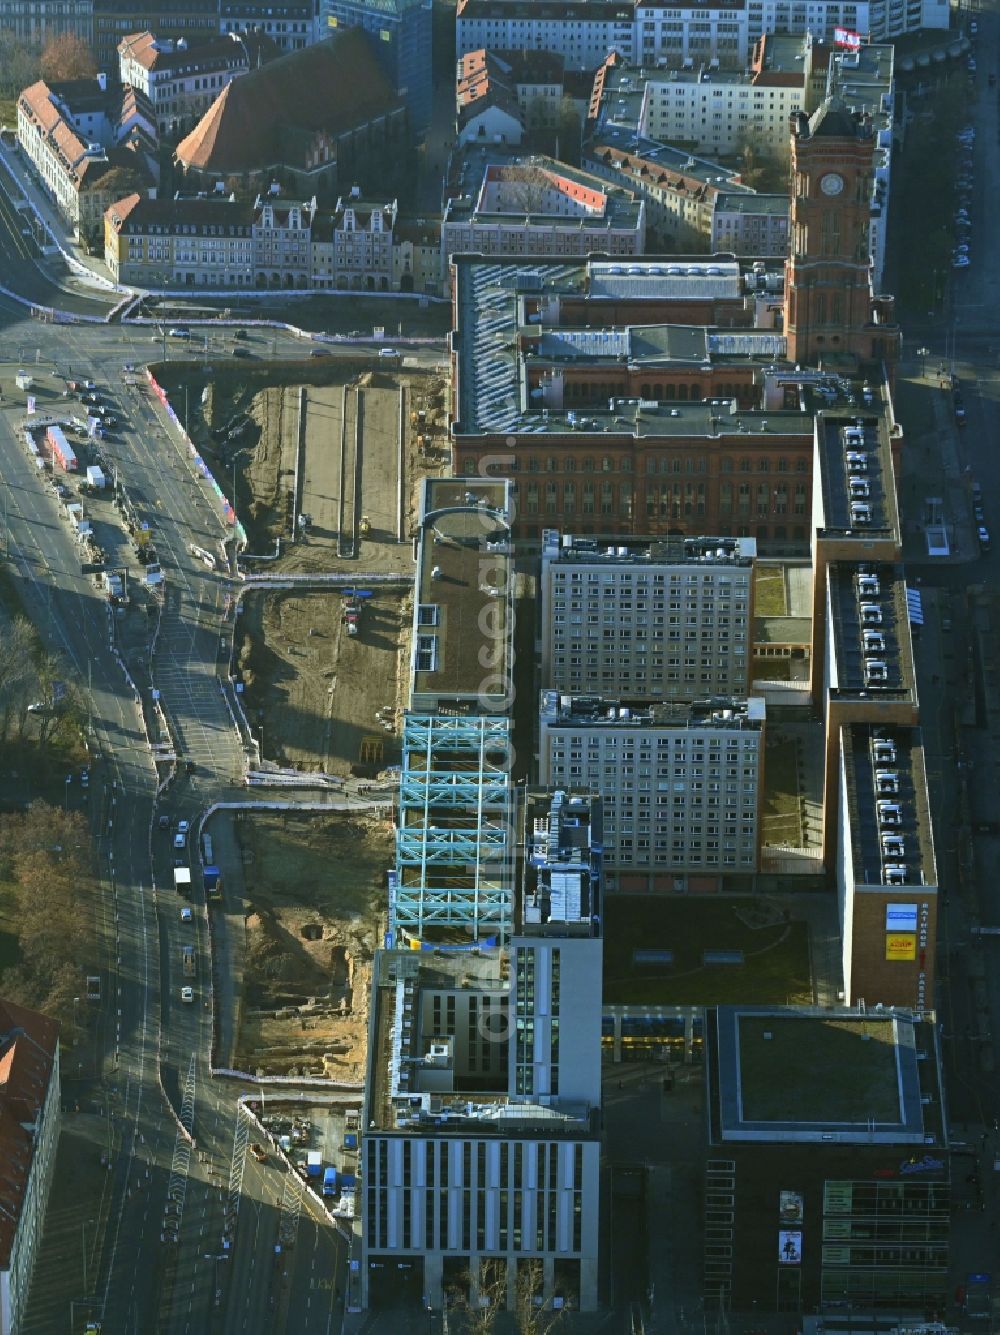 Berlin from the bird's eye view: Construction site with development works and embankments works as part of the reconstruction project on Molkenmarkt overlooking Rotes Rathaus along the Grunerstrasse in the district Mitte in Berlin, Germany